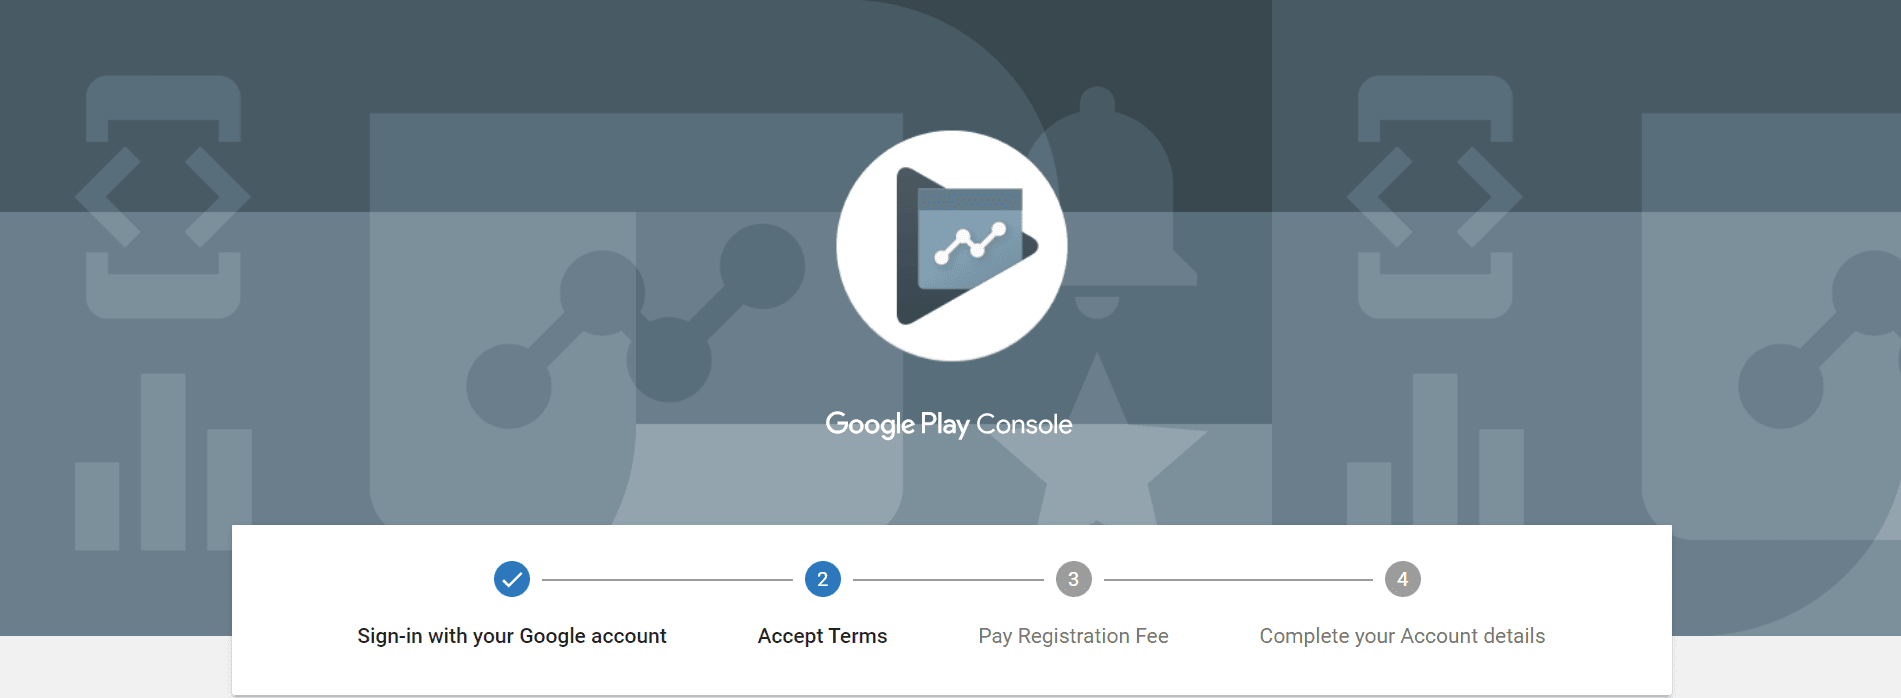 New Google Play Console Update 2020